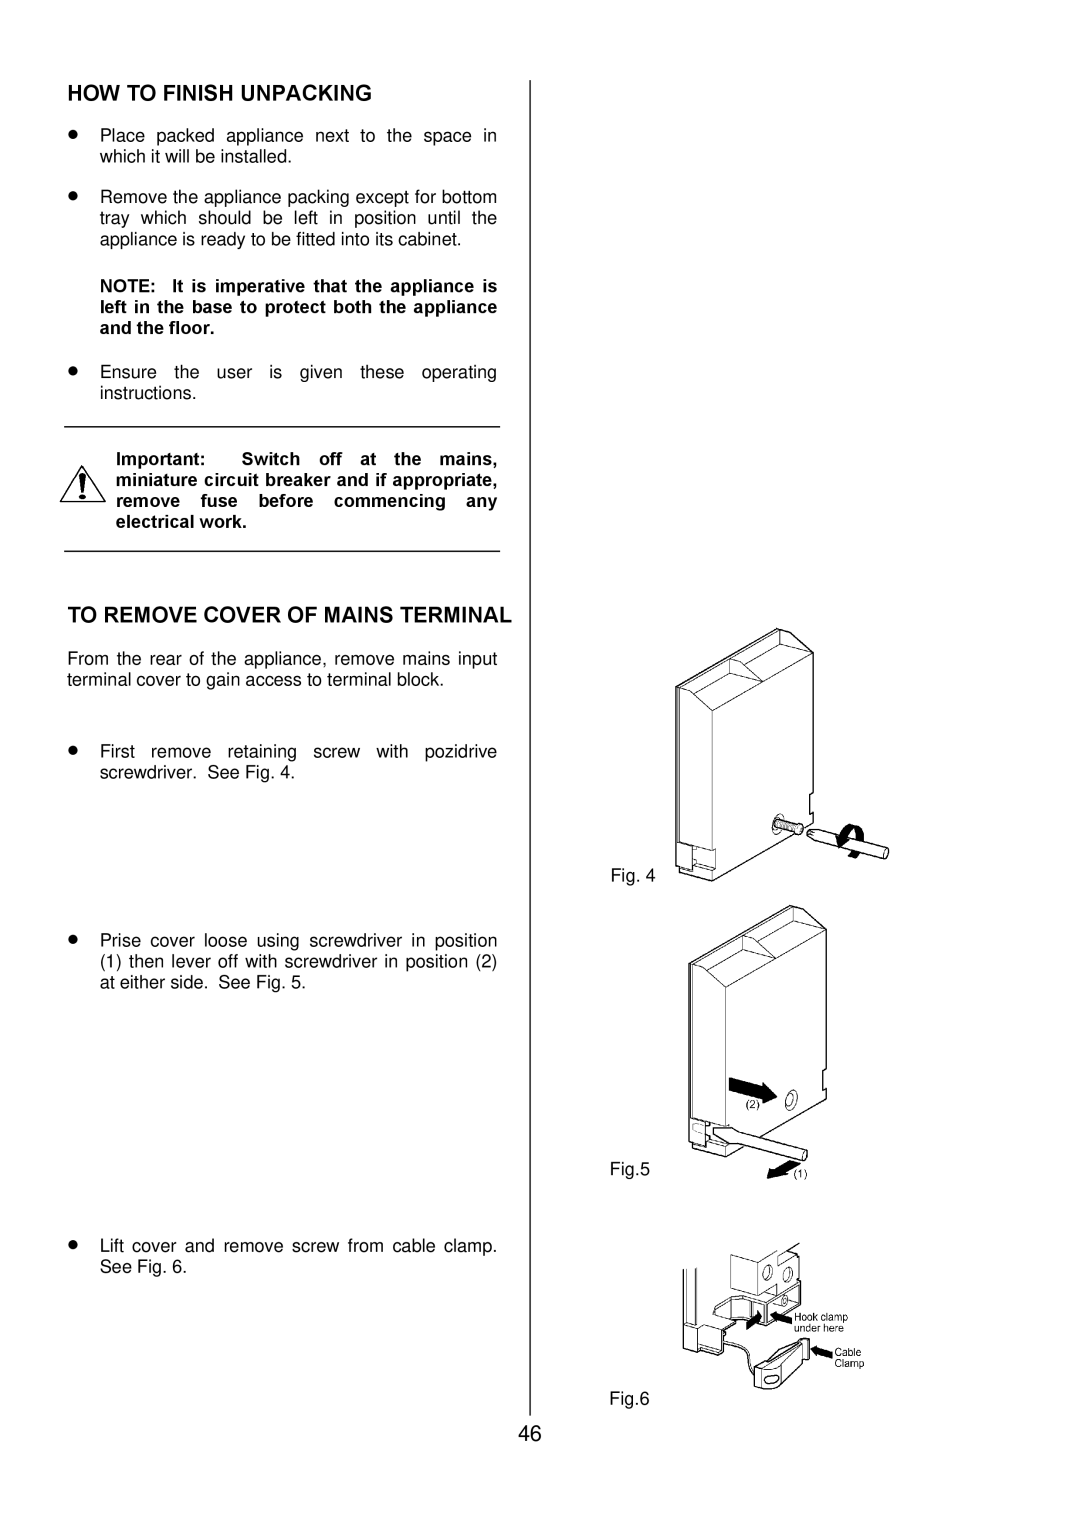 Electrolux D8800-4 operating instructions HOW to Finish Unpacking, To Remove Cover of Mains Terminal 